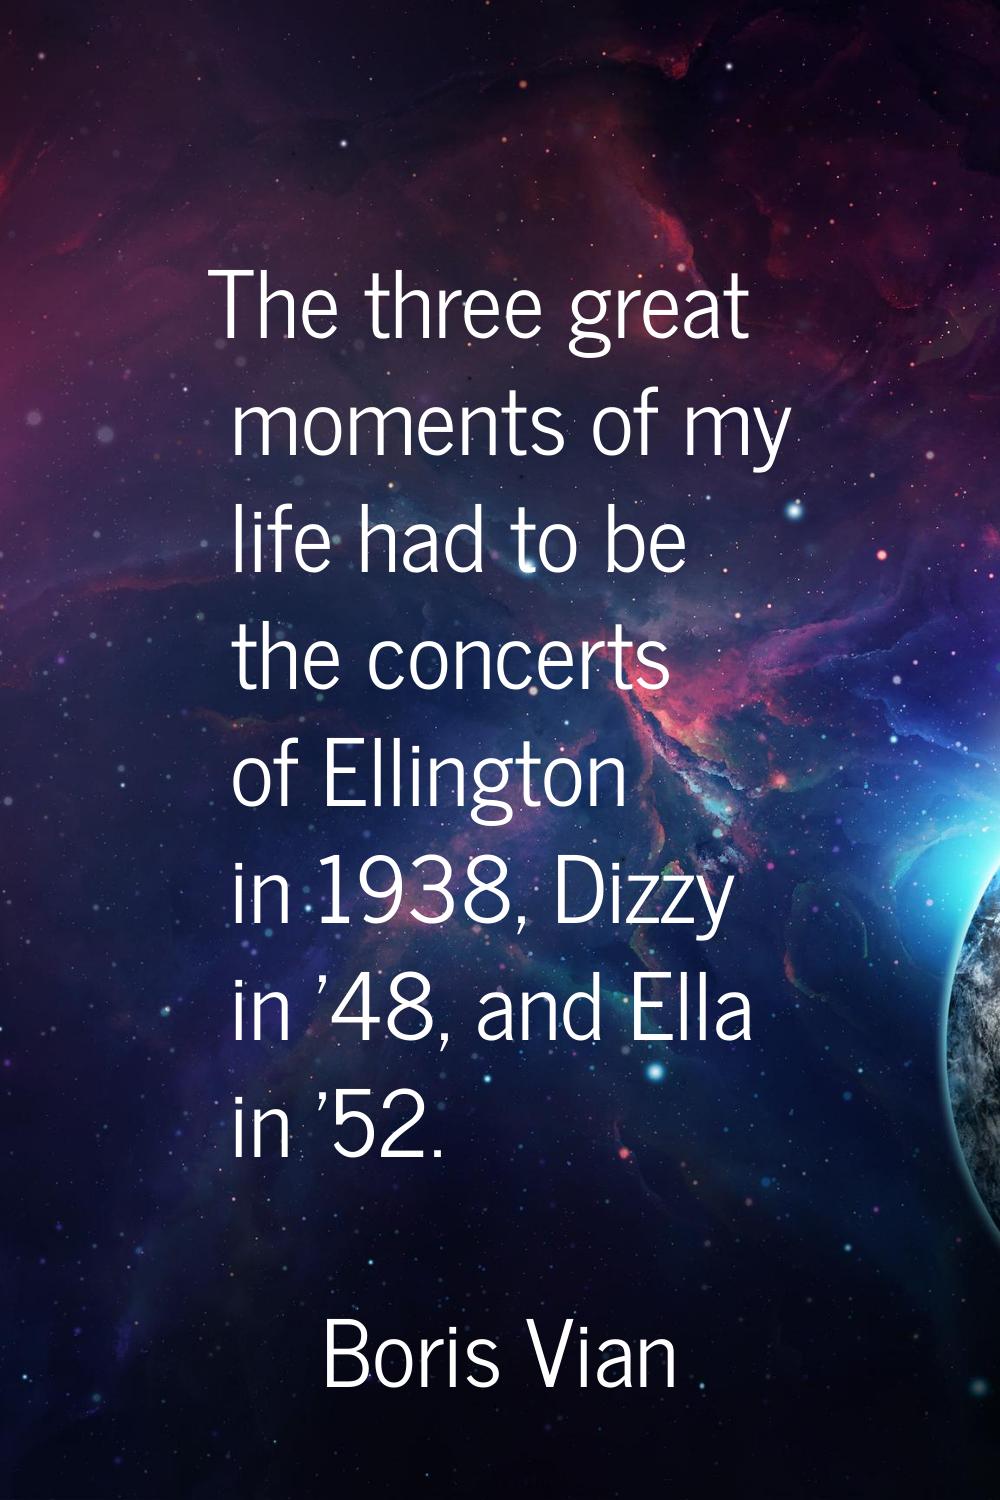 The three great moments of my life had to be the concerts of Ellington in 1938, Dizzy in '48, and E